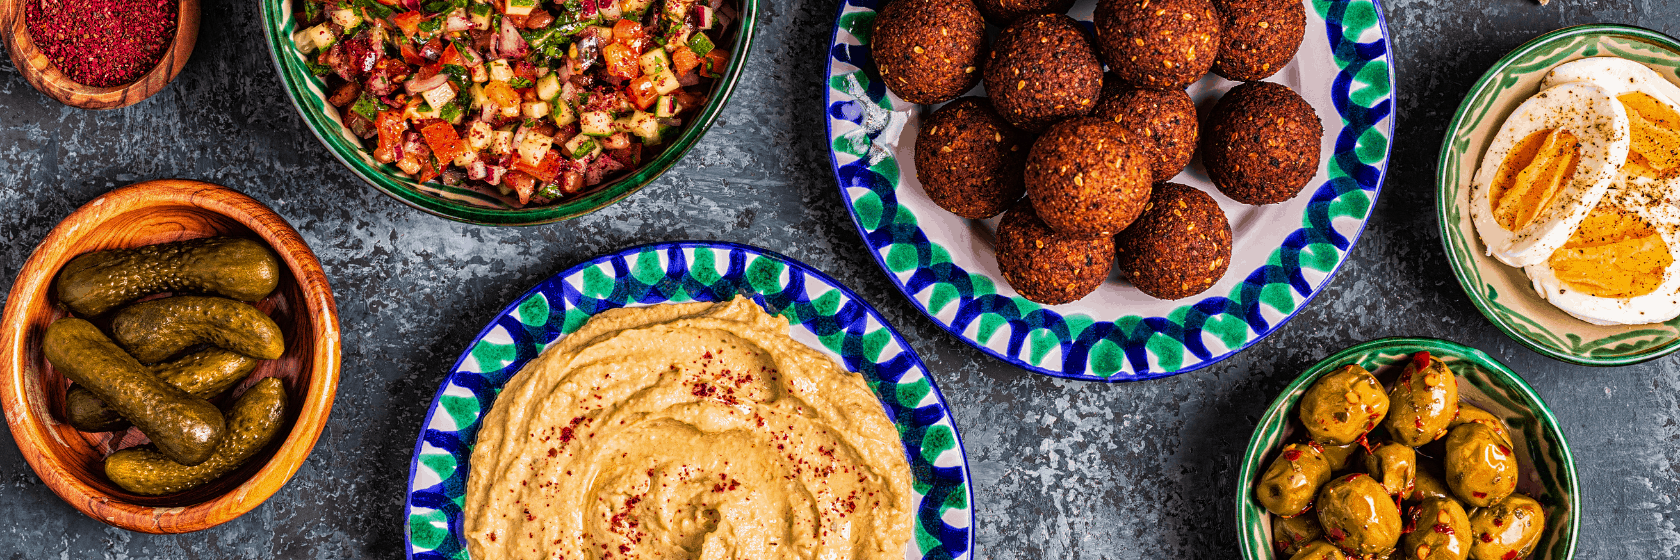 8 Healthy Middle Eastern Snacks 